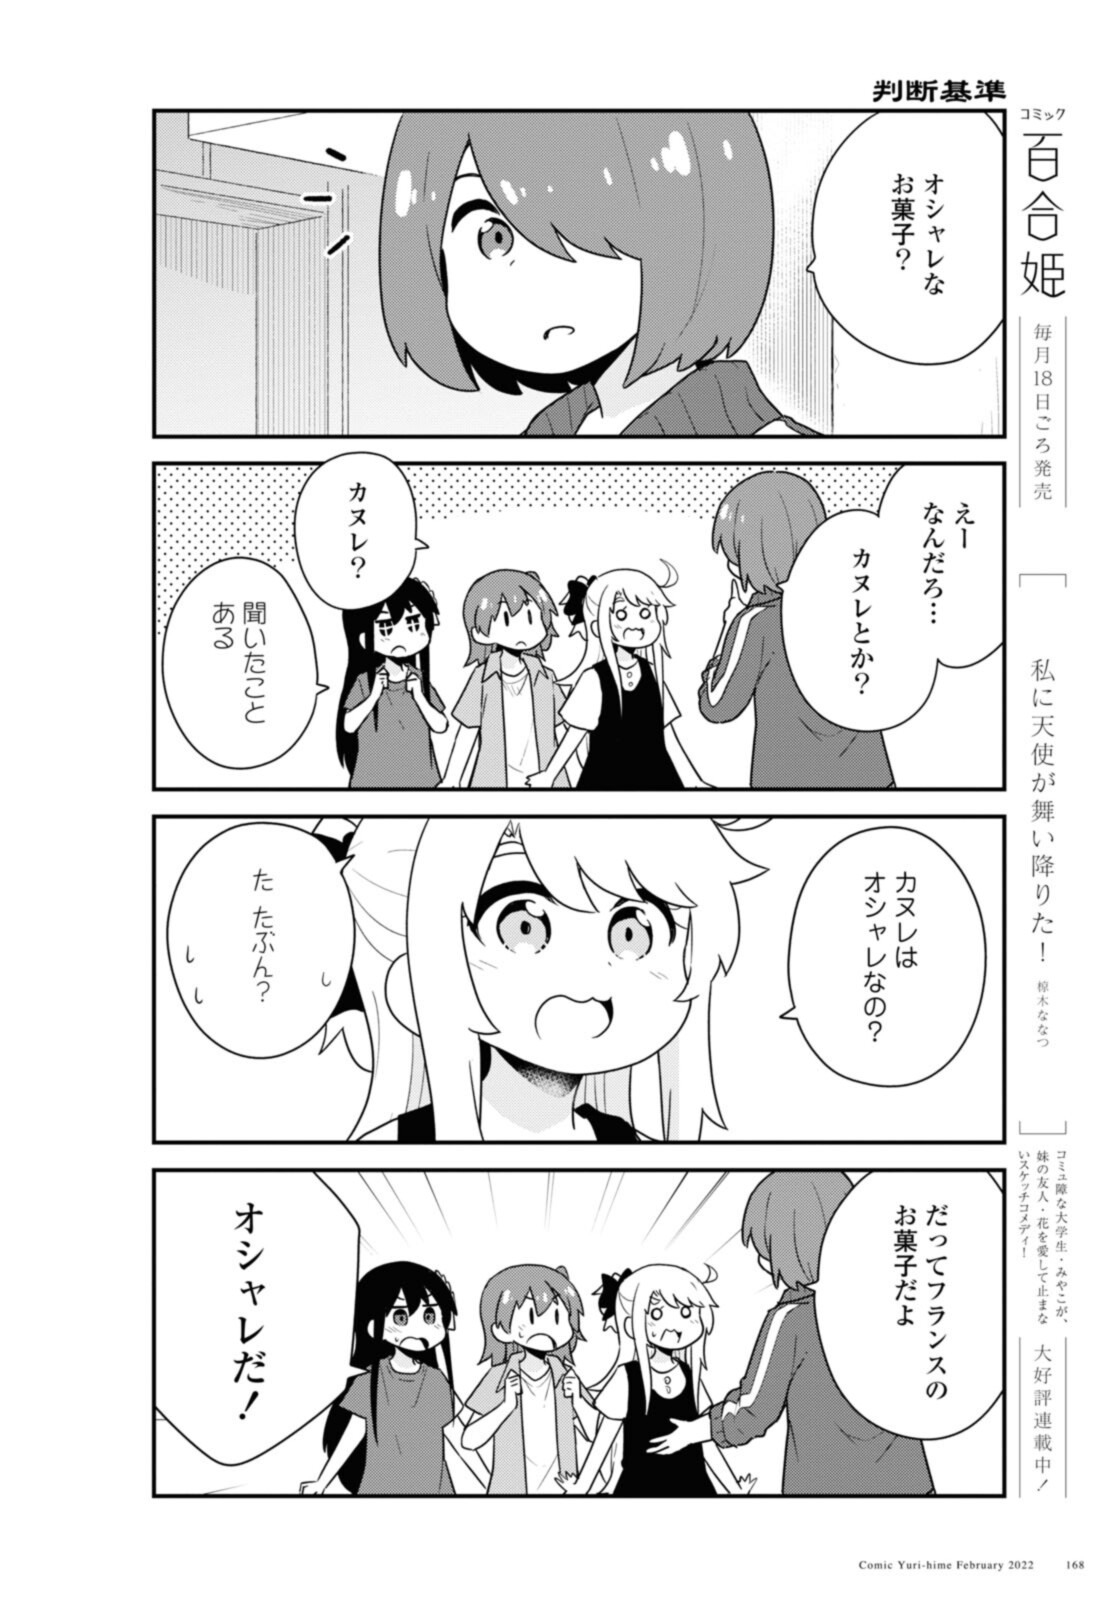 Wataten! An Angel Flew Down to Me 私に天使が舞い降りた！ 第92話 - Page 4